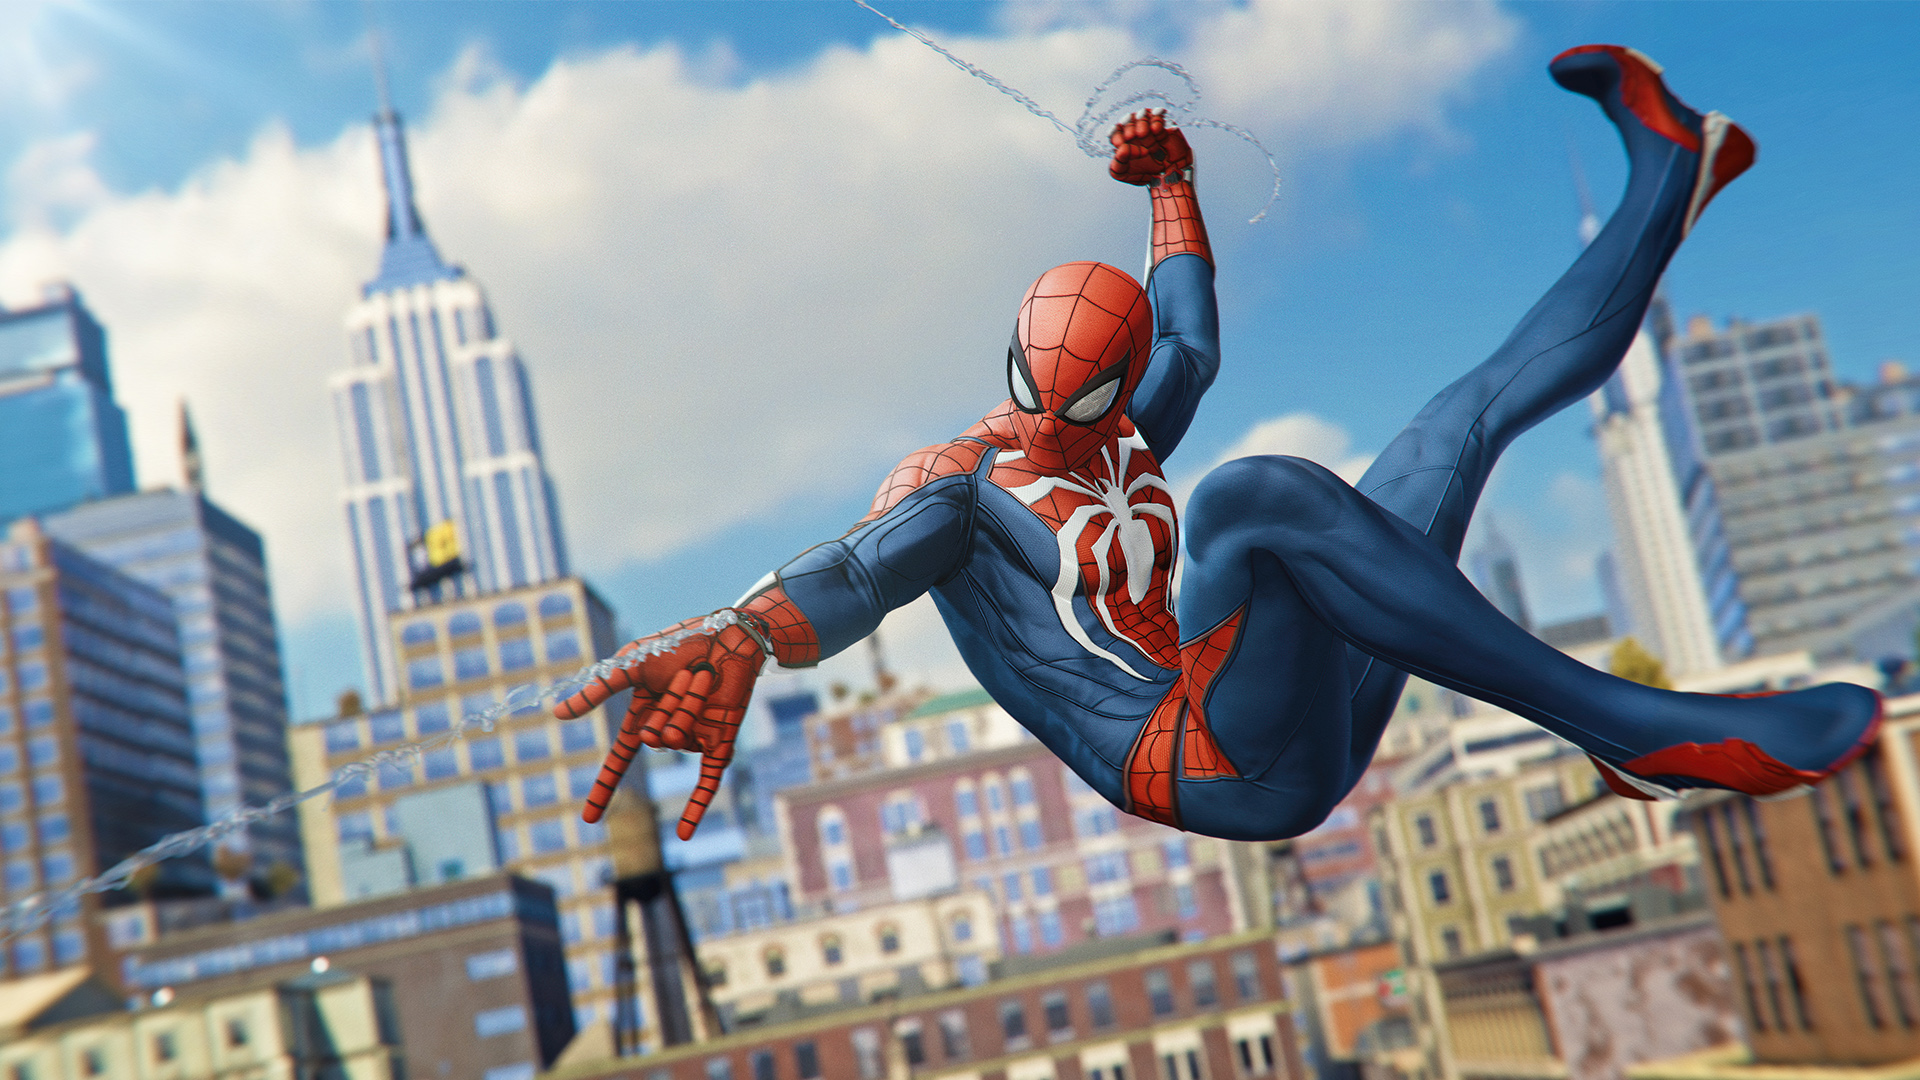 Xbox turned down Marvel, could have had Spider-Man